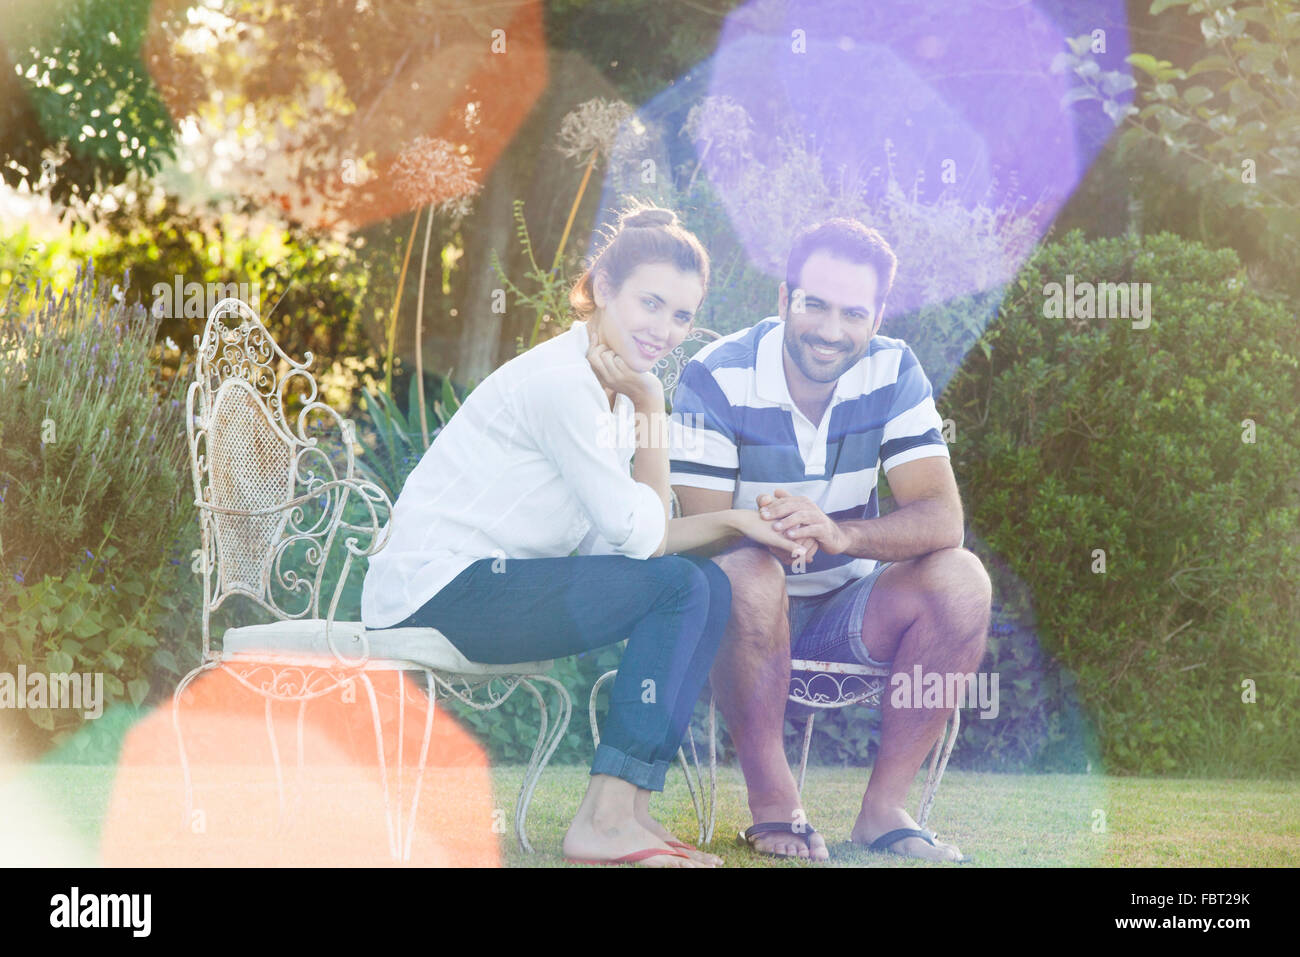 Couple spending time together outdoors, portrait Stock Photo